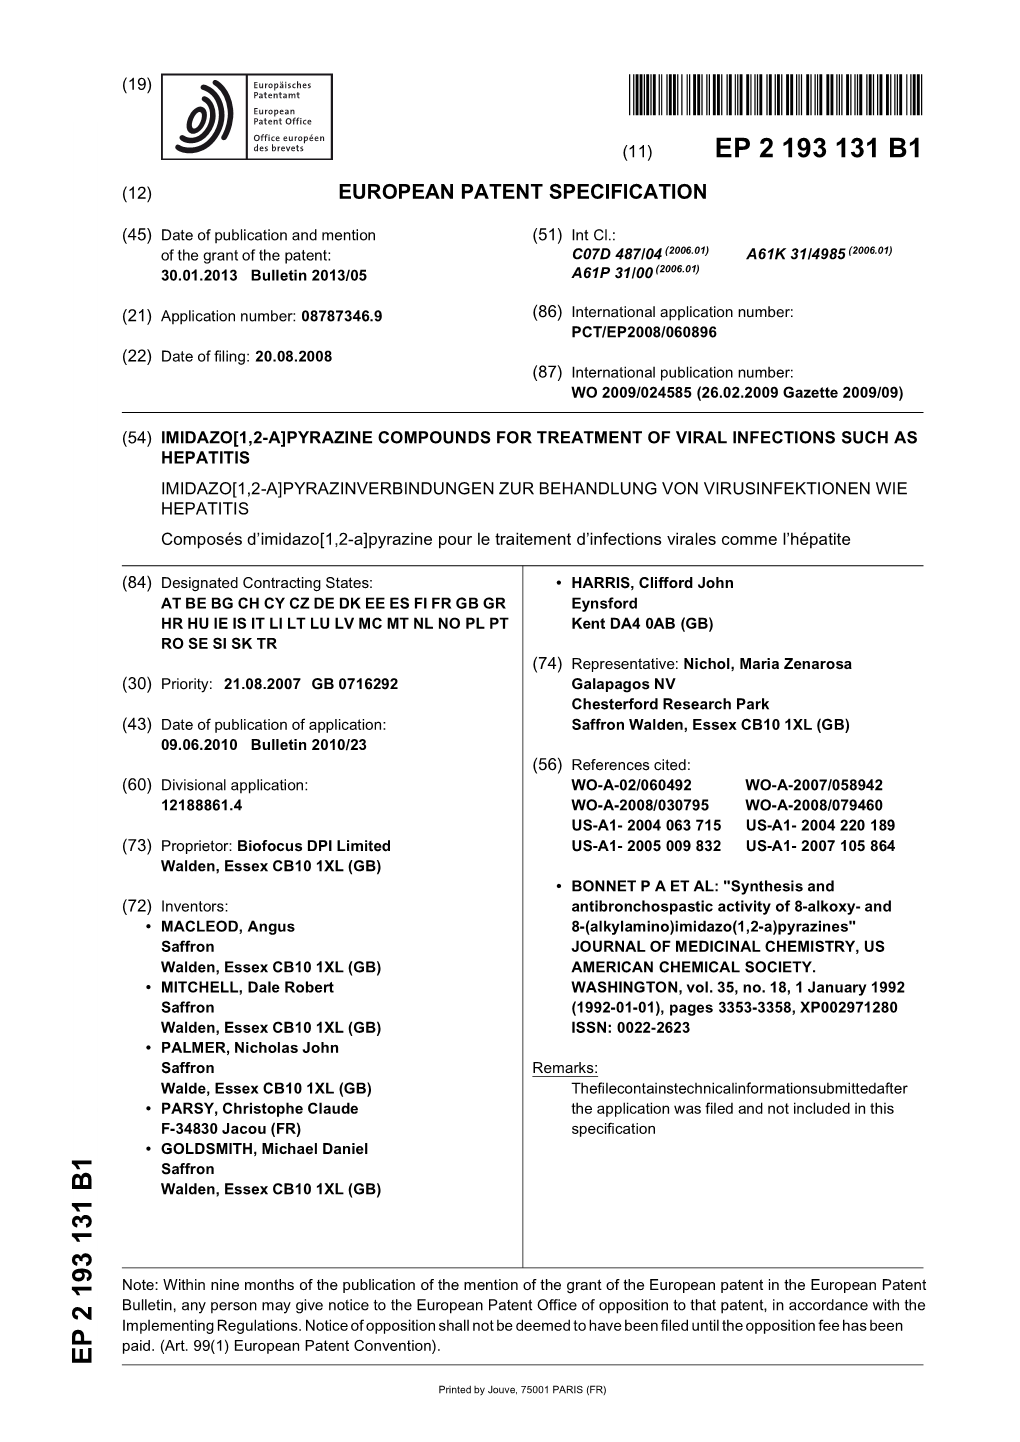 Imidazo[1,2-A]Pyrazine Compounds for Treatment